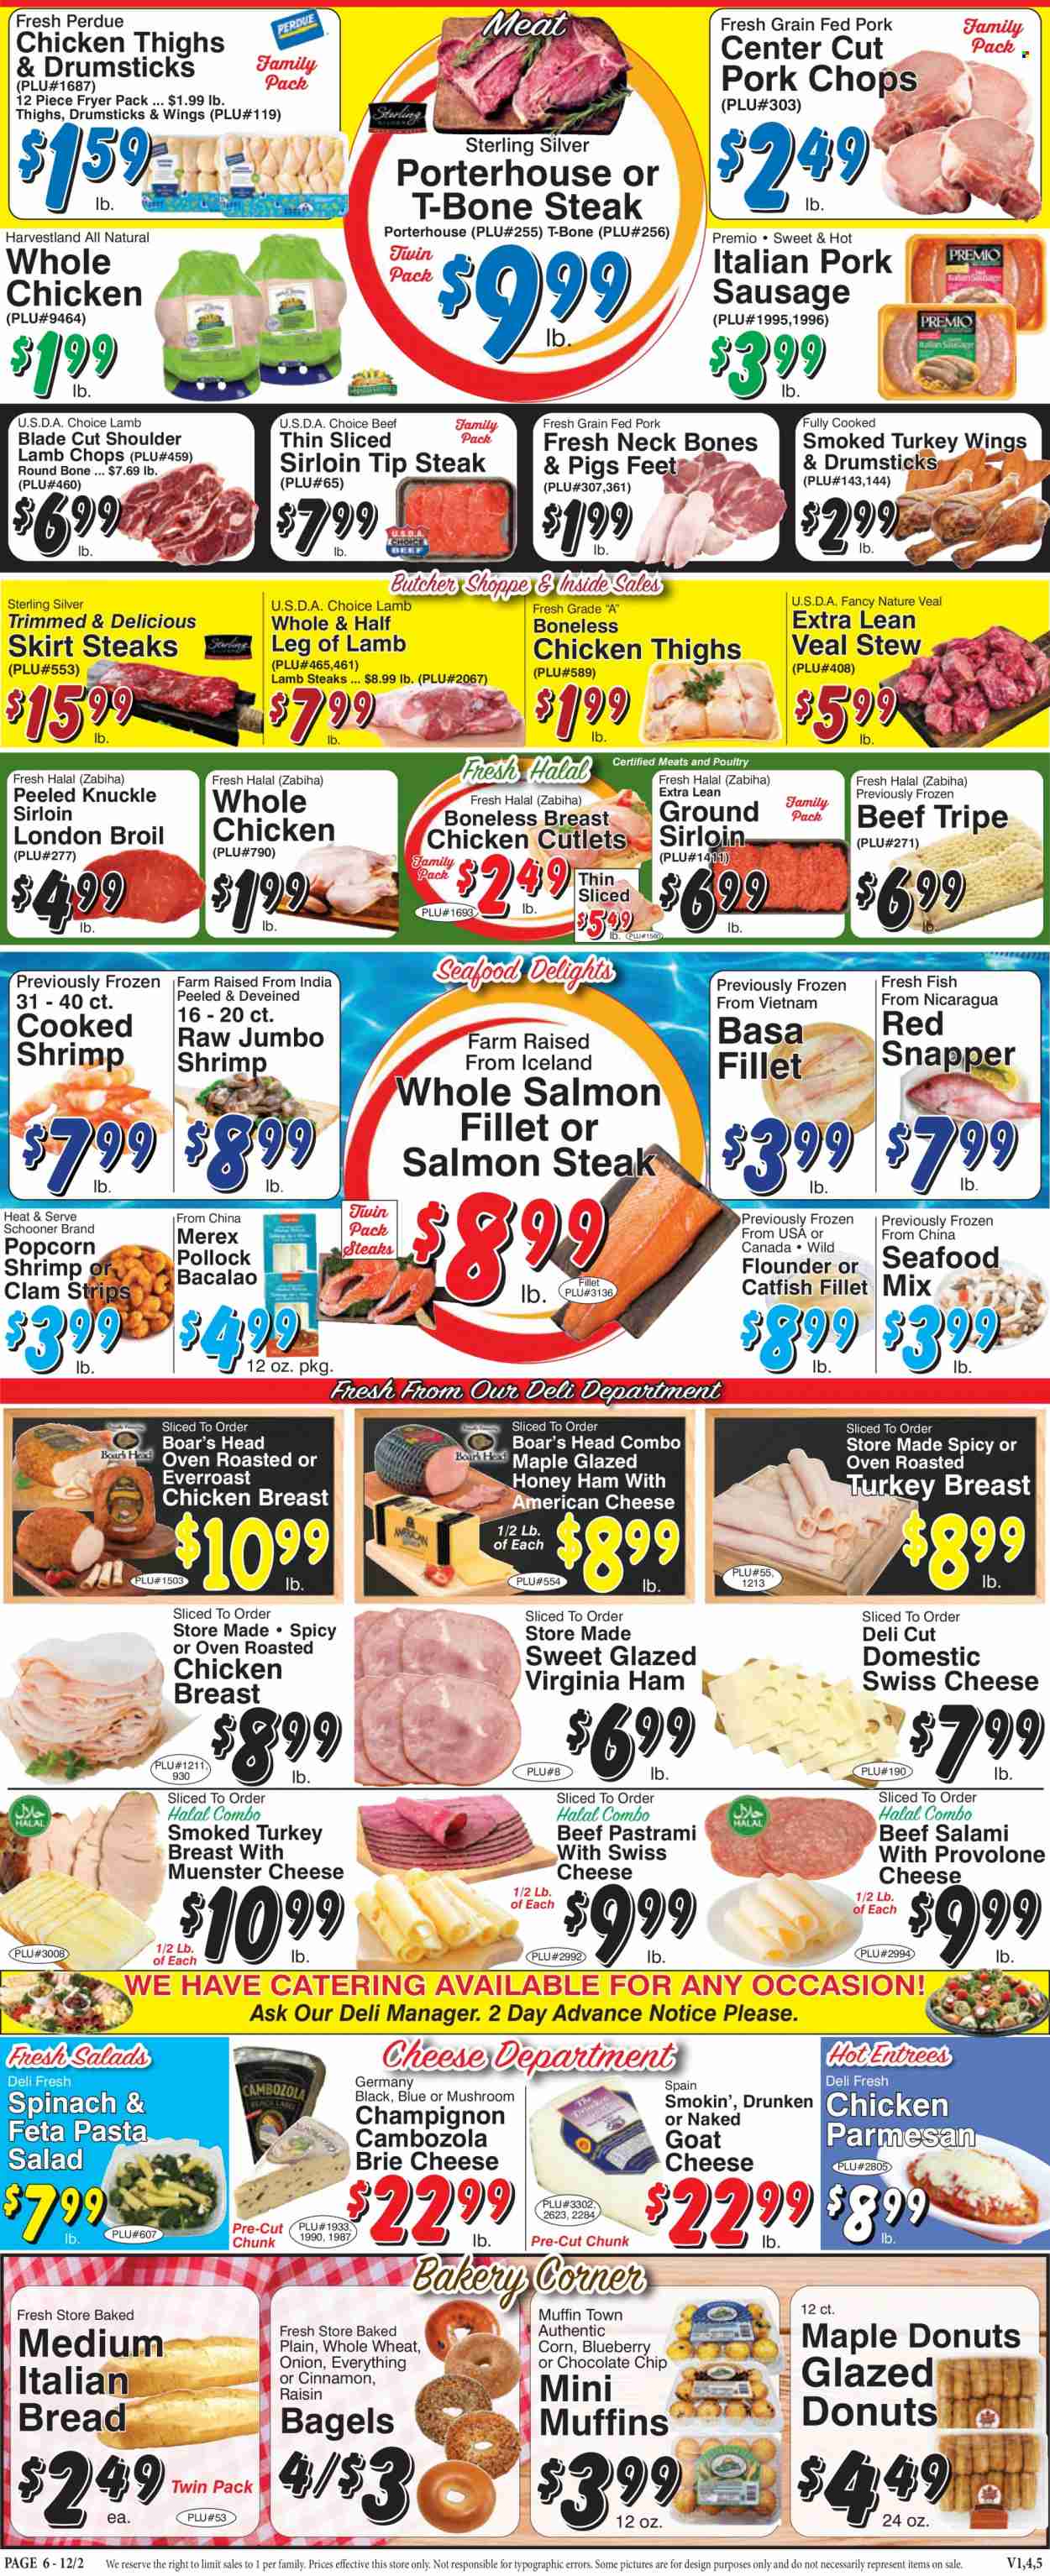 thumbnail - Trade Fair Supermarket Flyer - 12/02/2022 - 12/08/2022 - Sales products - bagels, bread, donut, muffin, corn, onion, salad, catfish, clams, flounder, red snapper, salmon fillet, pollock, seafood, fish, shrimps, pasta, Perdue®, salami, ham, pastrami, virginia ham, sausage, pork sausage, pasta salad, american cheese, goat cheese, cheese, brie, Münster cheese, Provolone, strips, chocolate chips, cinnamon, whole chicken, chicken breasts, chicken cutlets, chicken thighs, turkey wings, beef meat, beef tripe, t-bone steak, steak, pork chops, pork loin, pork meat, lamb chops, lamb meat, lamb leg. Page 6.